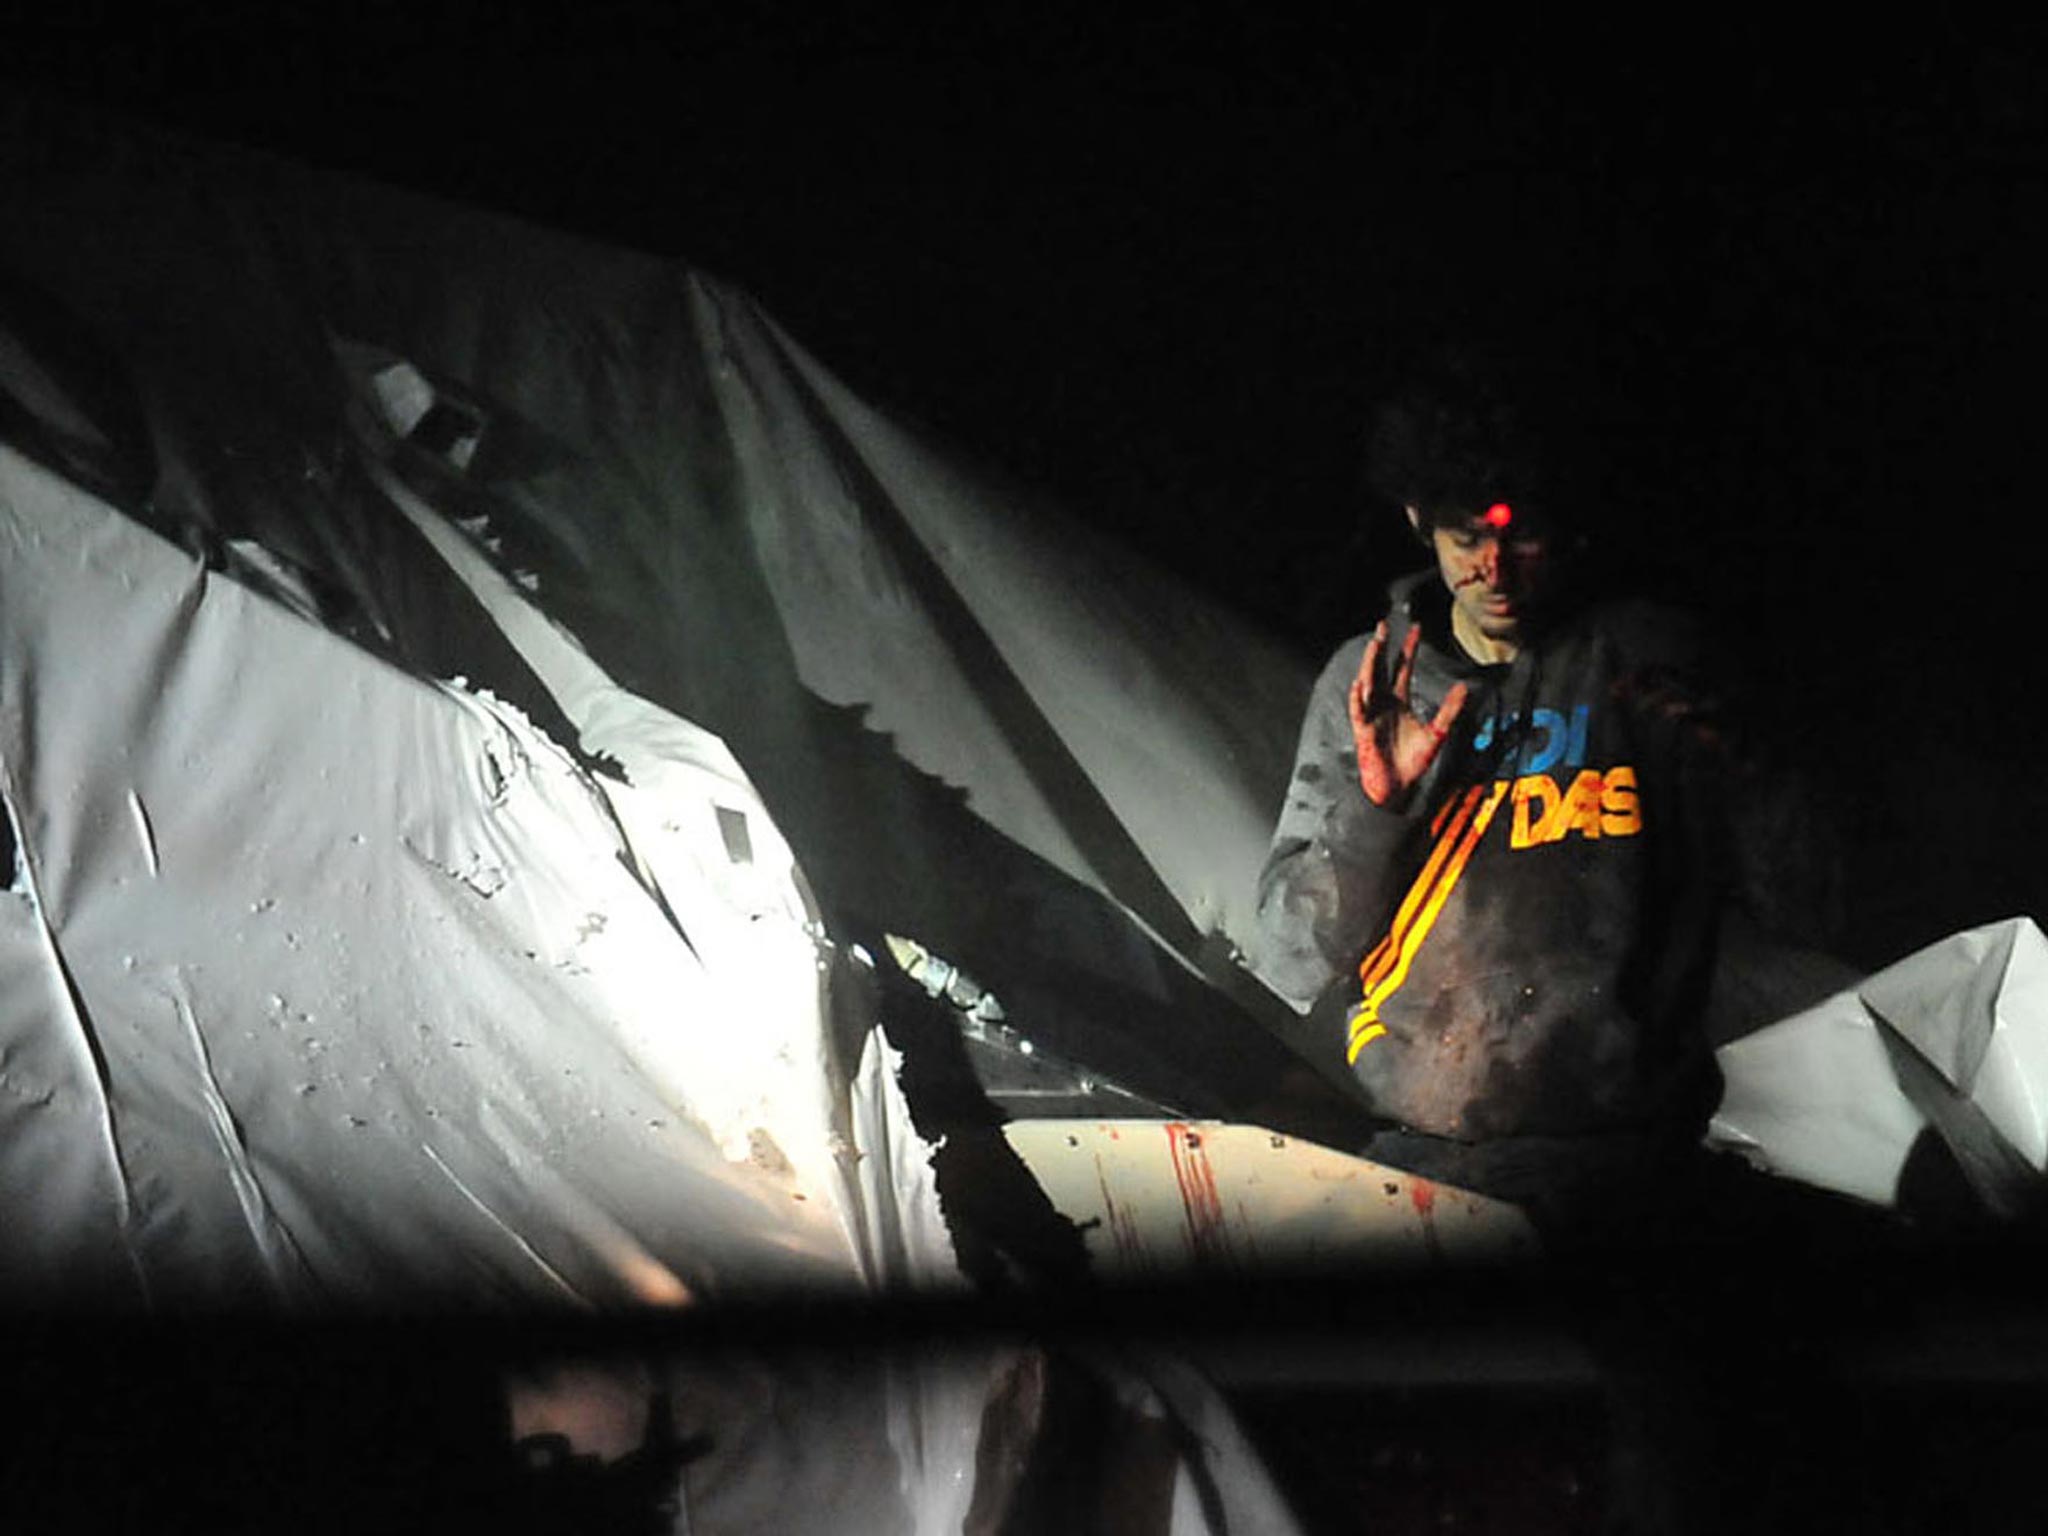 An injured Dzhokhar Tsarnaev emerges from the boat where he had been hiding - a sniper's red dot can be seen on his head